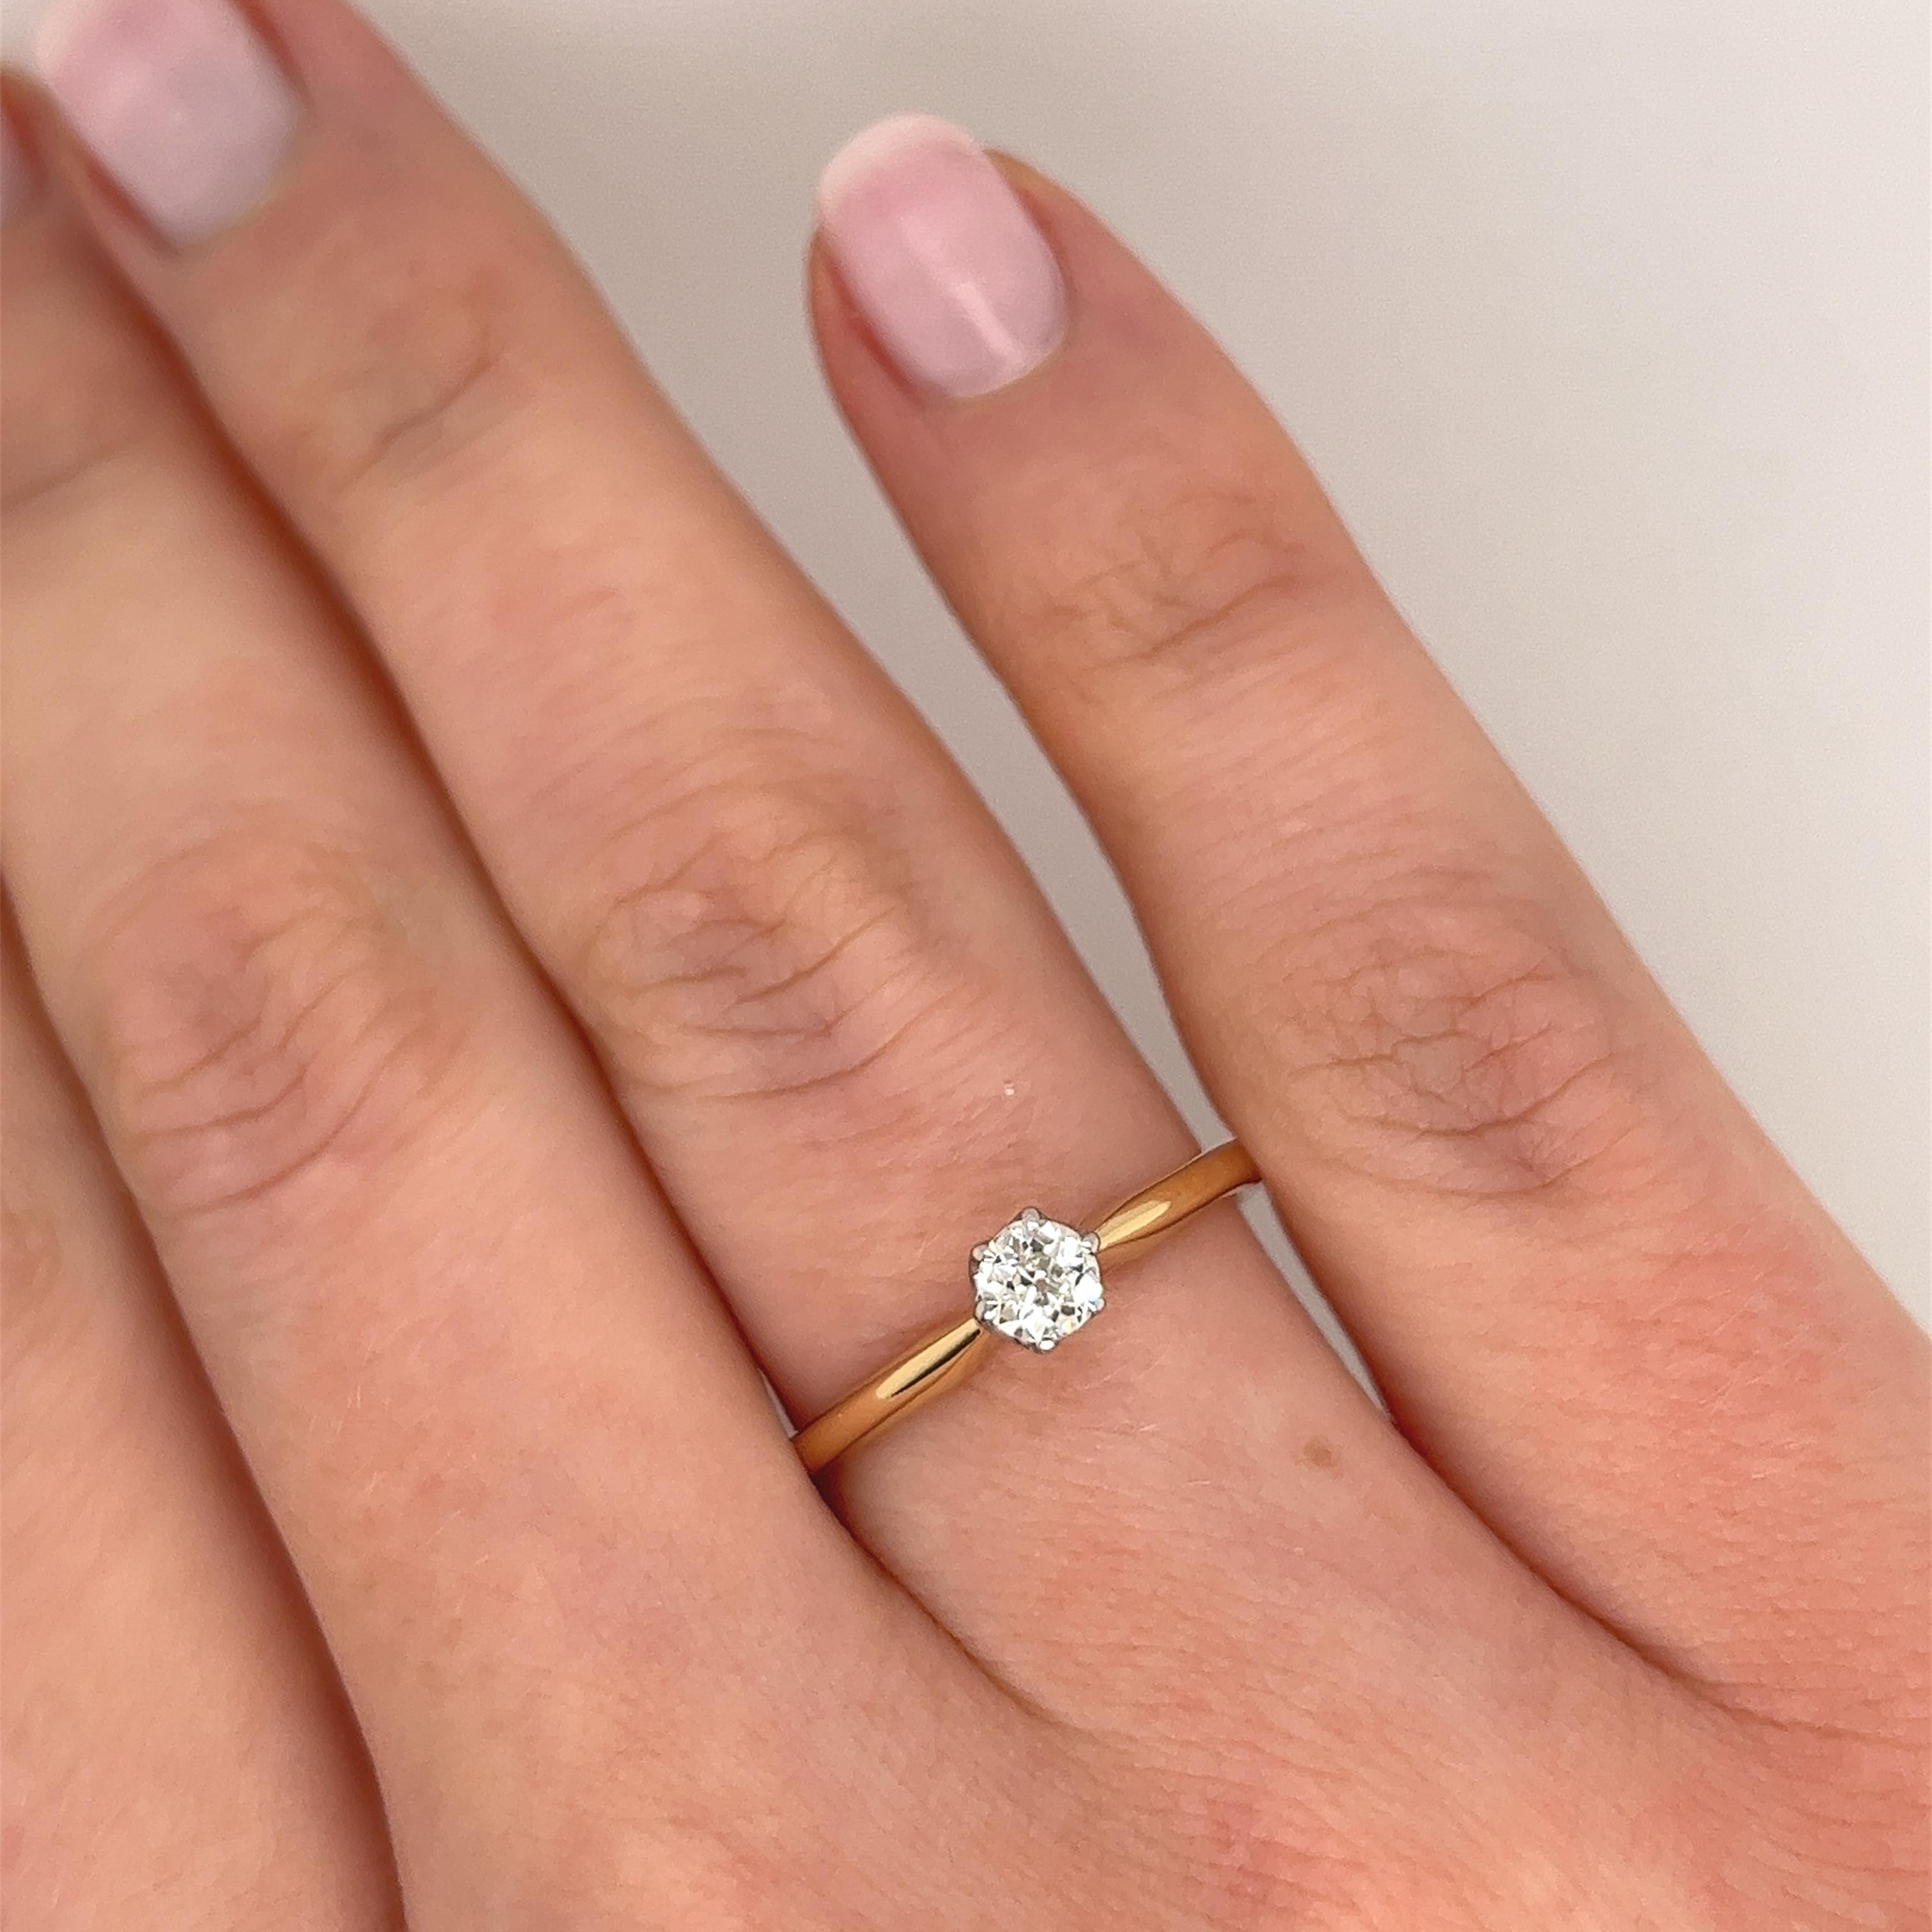 18ct White & Yellow Gold Solitaire Round Diamond Engagement Ring 0.25ct H/SI1 In Excellent Condition For Sale In London, GB